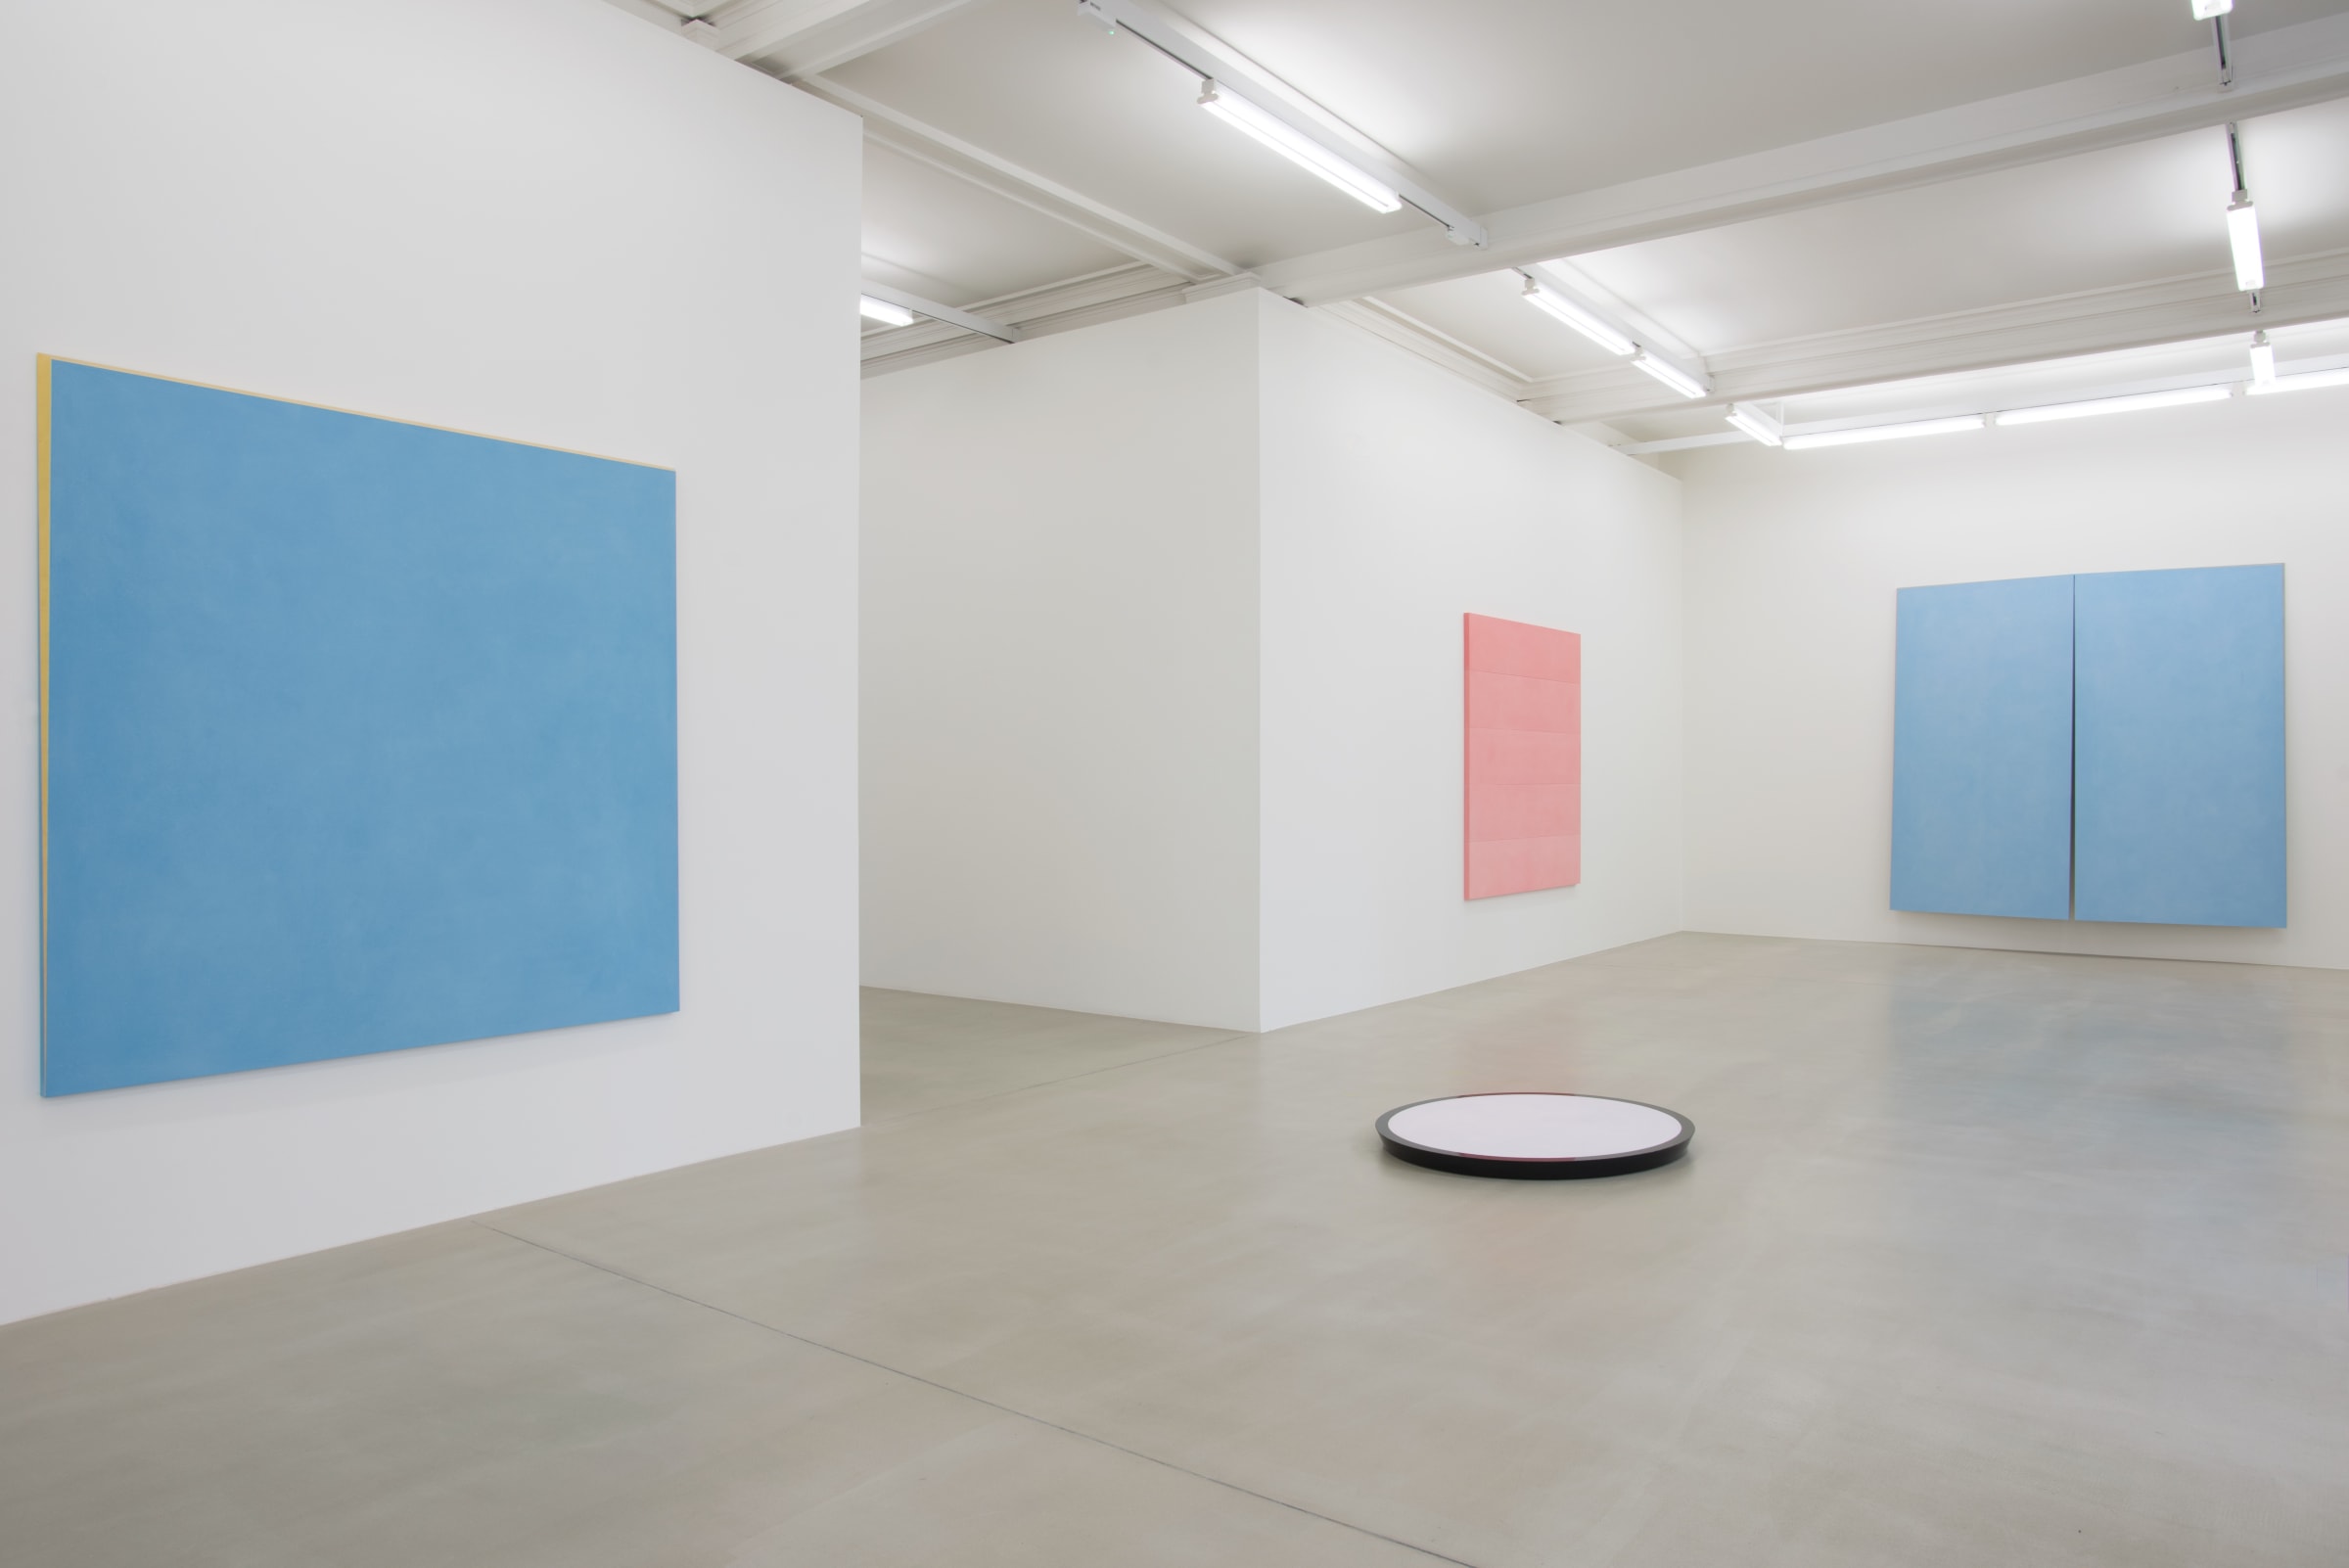 In a large white space with grey stone floors, a white circular sculpture with black trimming lies on the floor. On the walls surrounding it hang a light blue painting with gold trim, a light pink painting, and a larger blue painting, bisected.